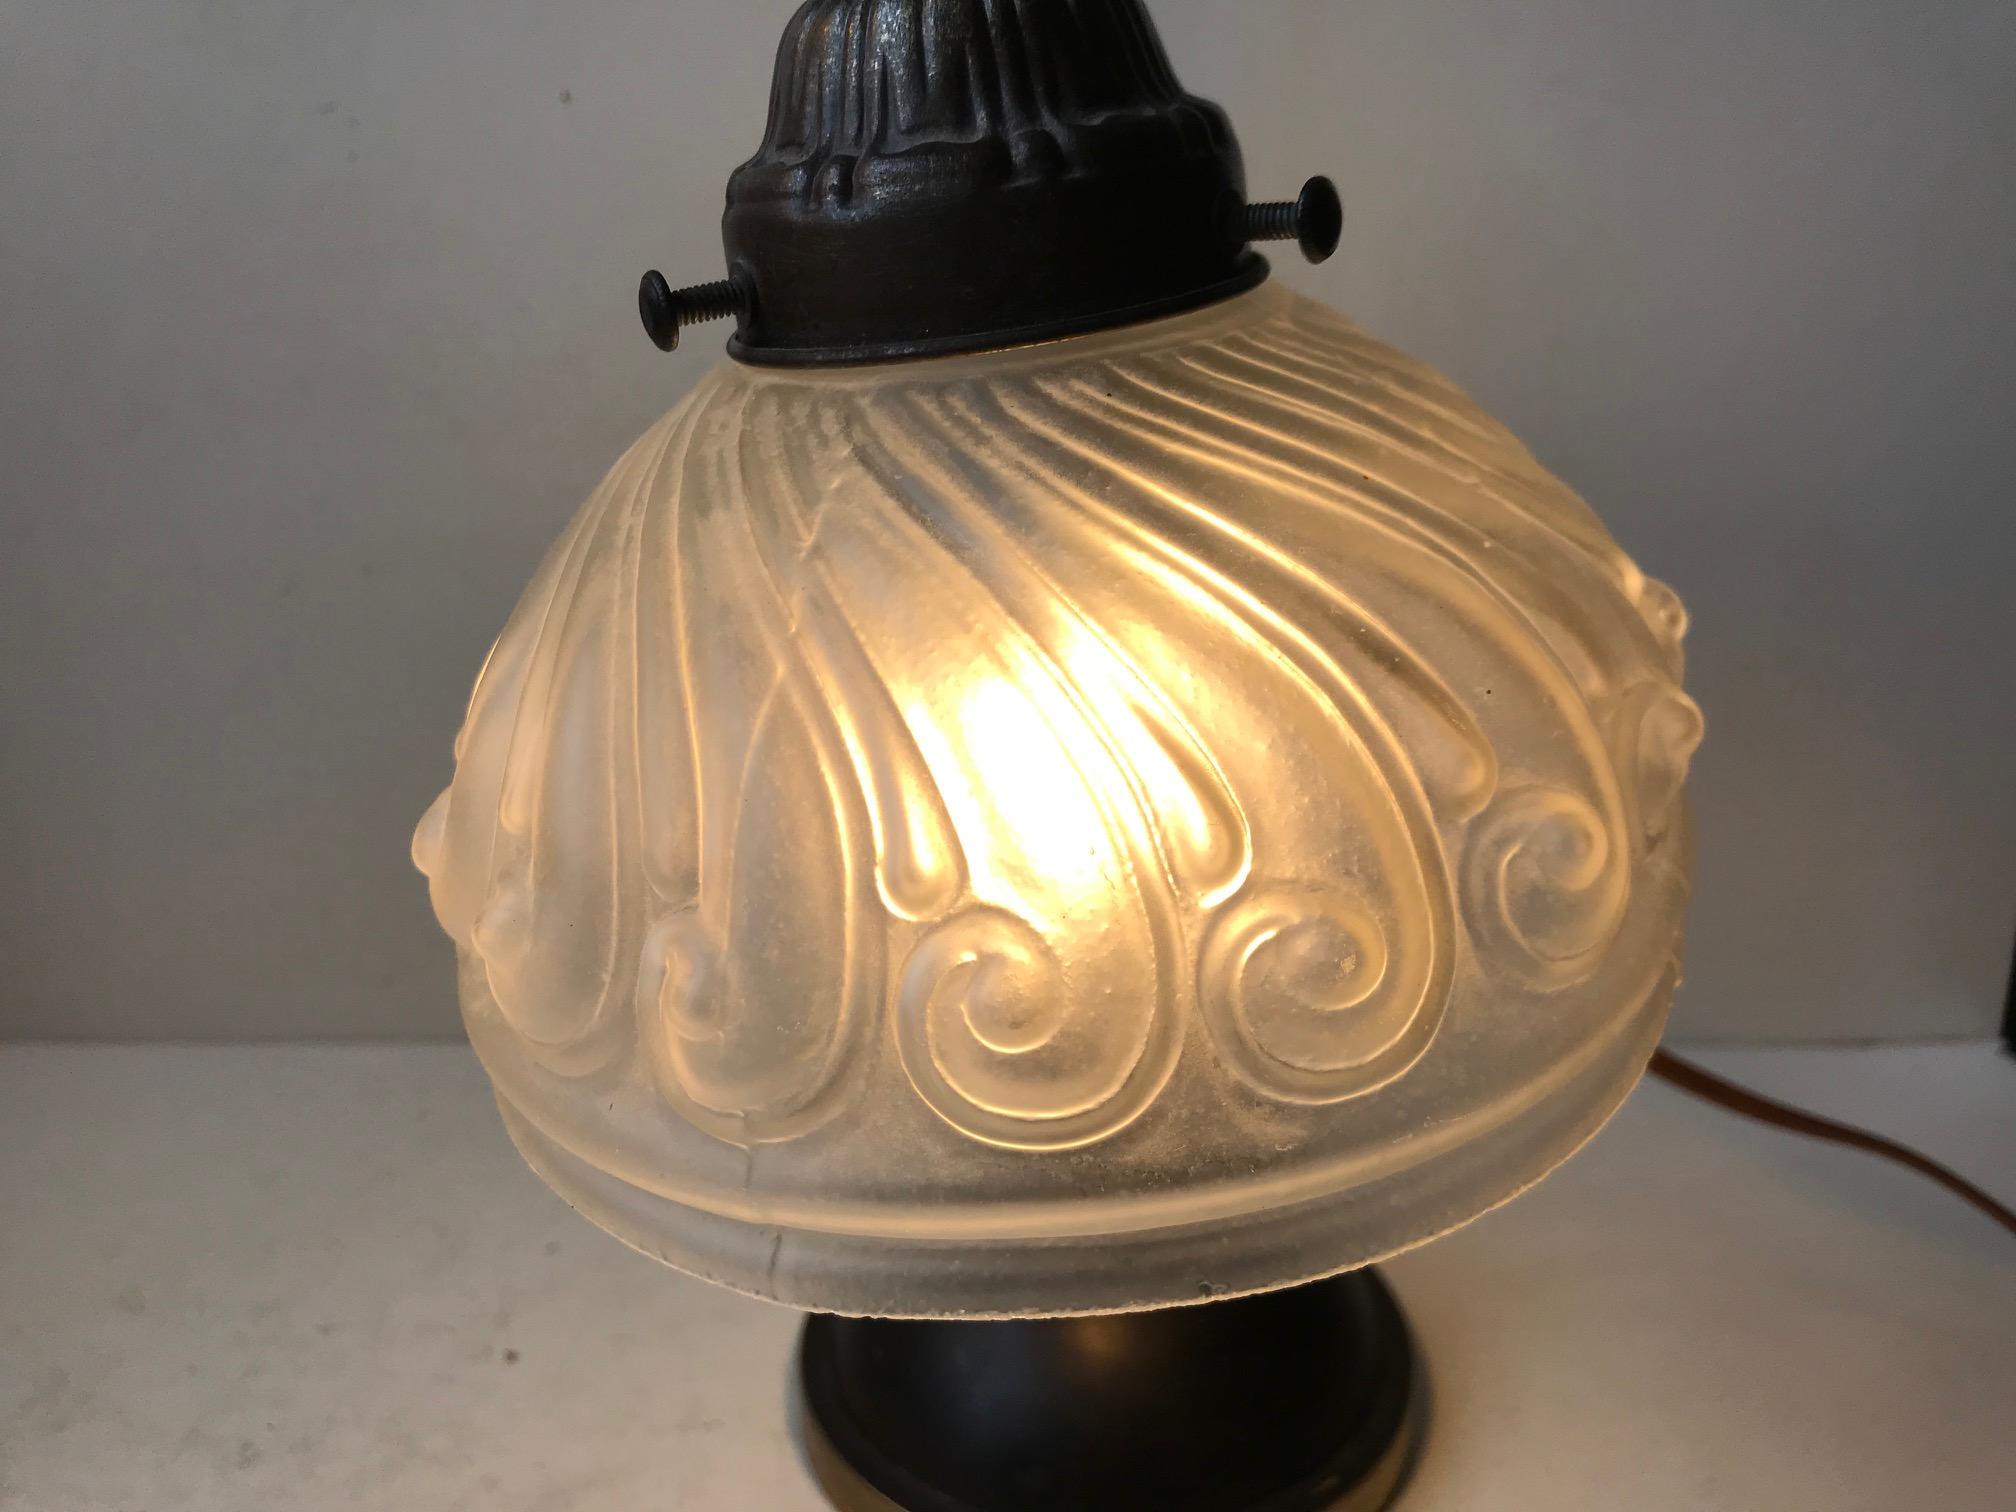 Italian Art Deco Table Lamp in Brass and Glass, 1930s For Sale 3